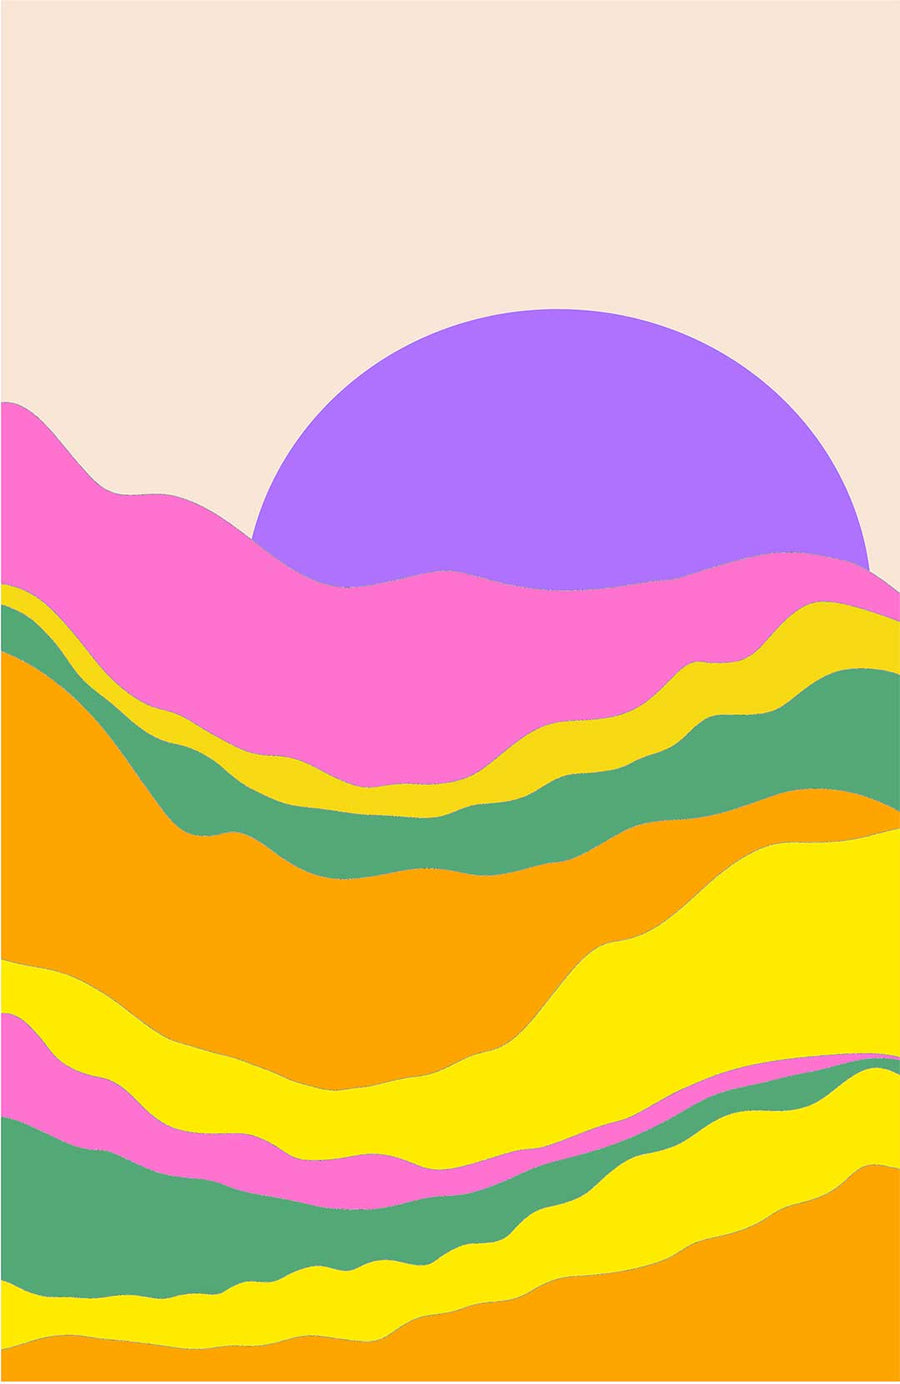 Colourful digital painting in bold, block colours and wiggly lines of pink, orange, yellow, purple and green to form what looks like a sun in the sky setting over sand dunes.